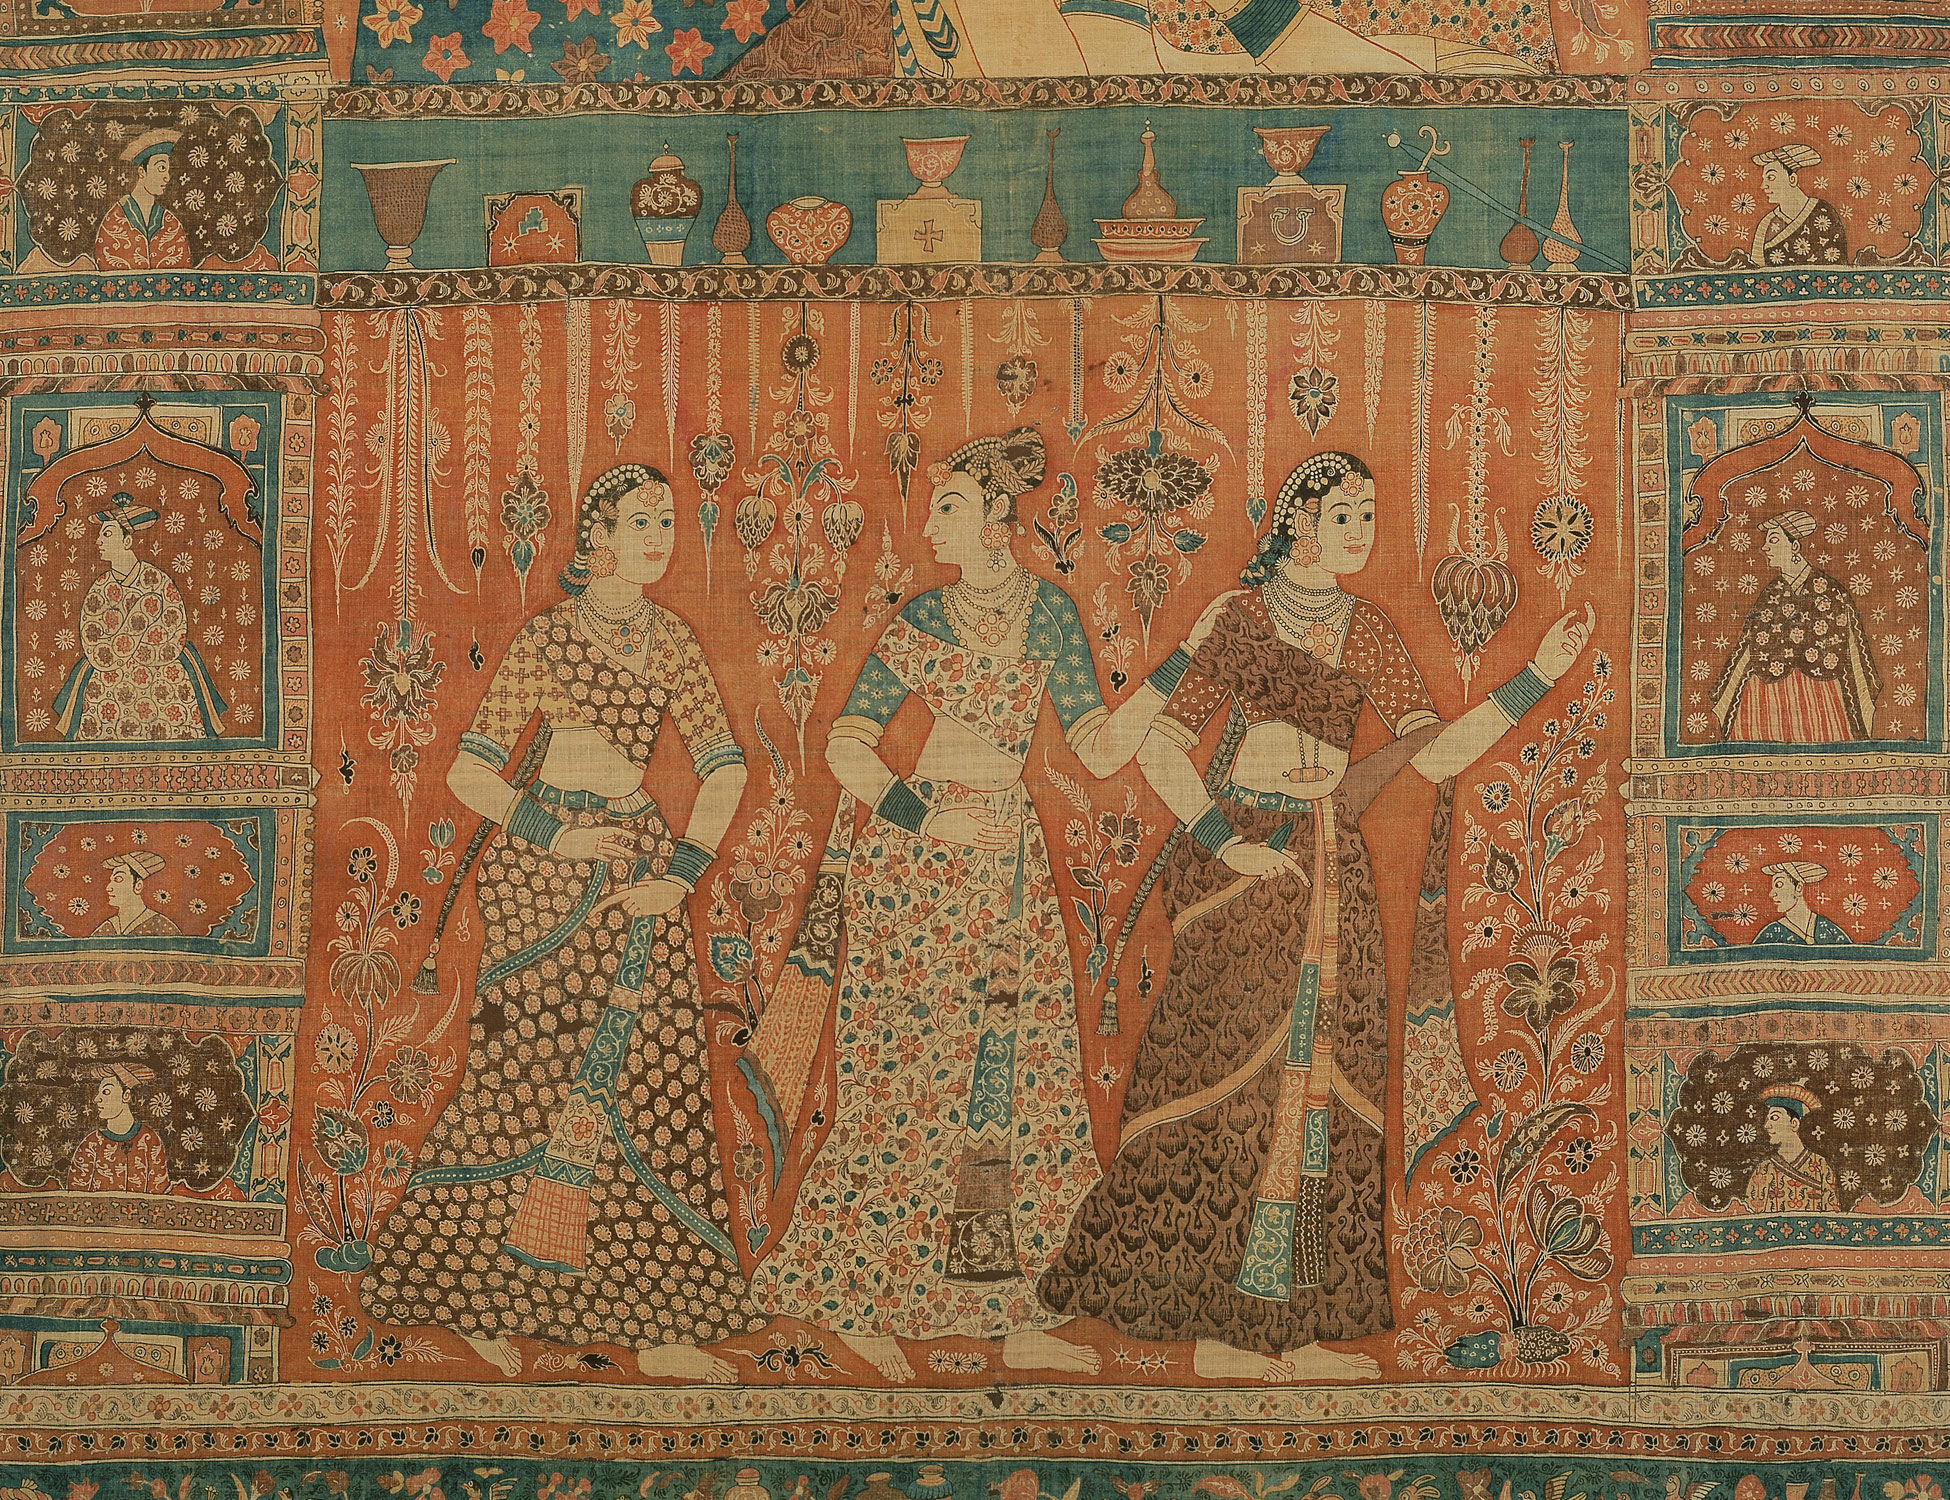 Kalamkari hanging with figures in an architectural setting 